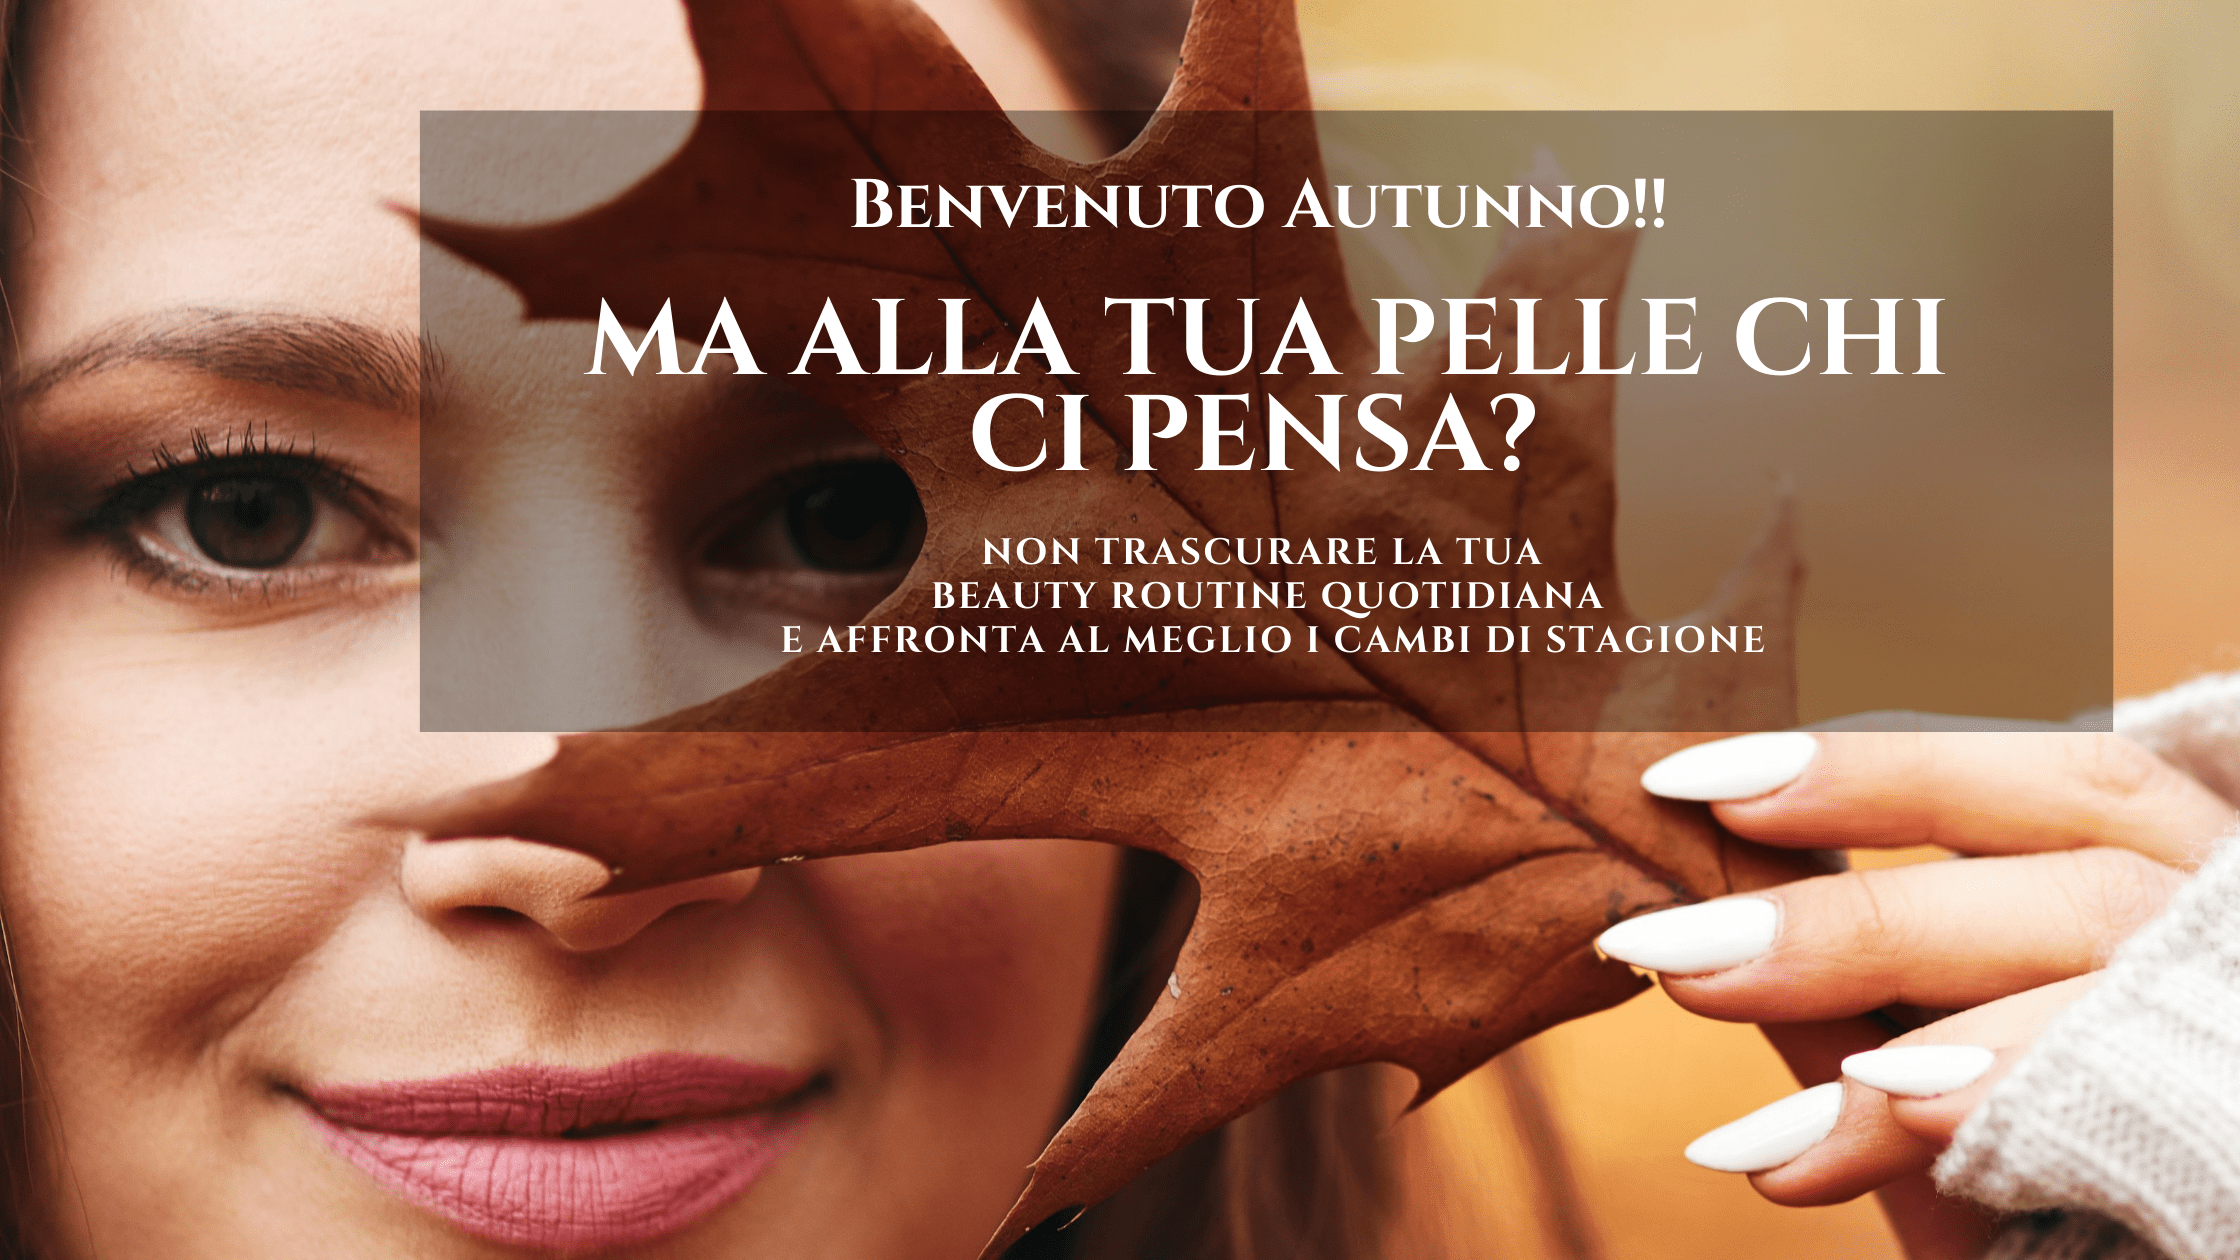 You are currently viewing BENVENUTO AUTUNNO!